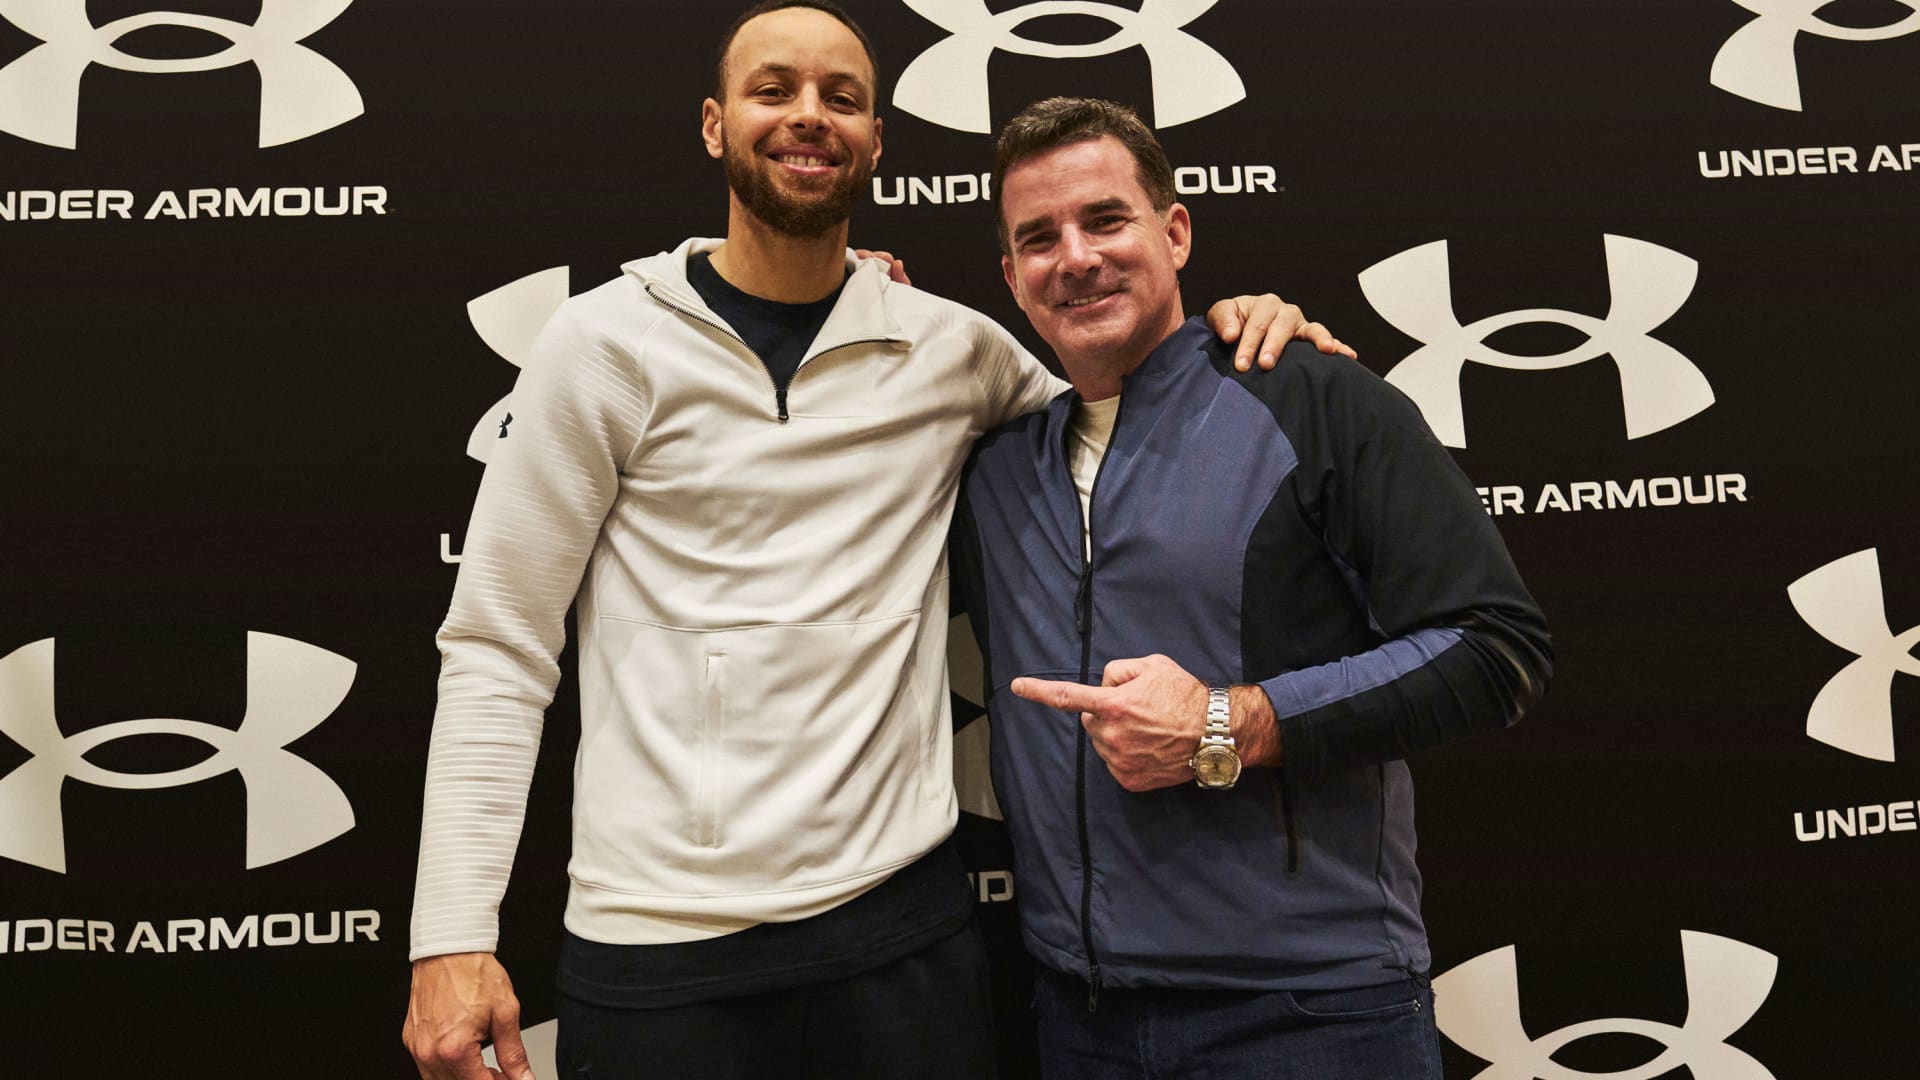 Stephen's new role will be as President of the Curry Brand